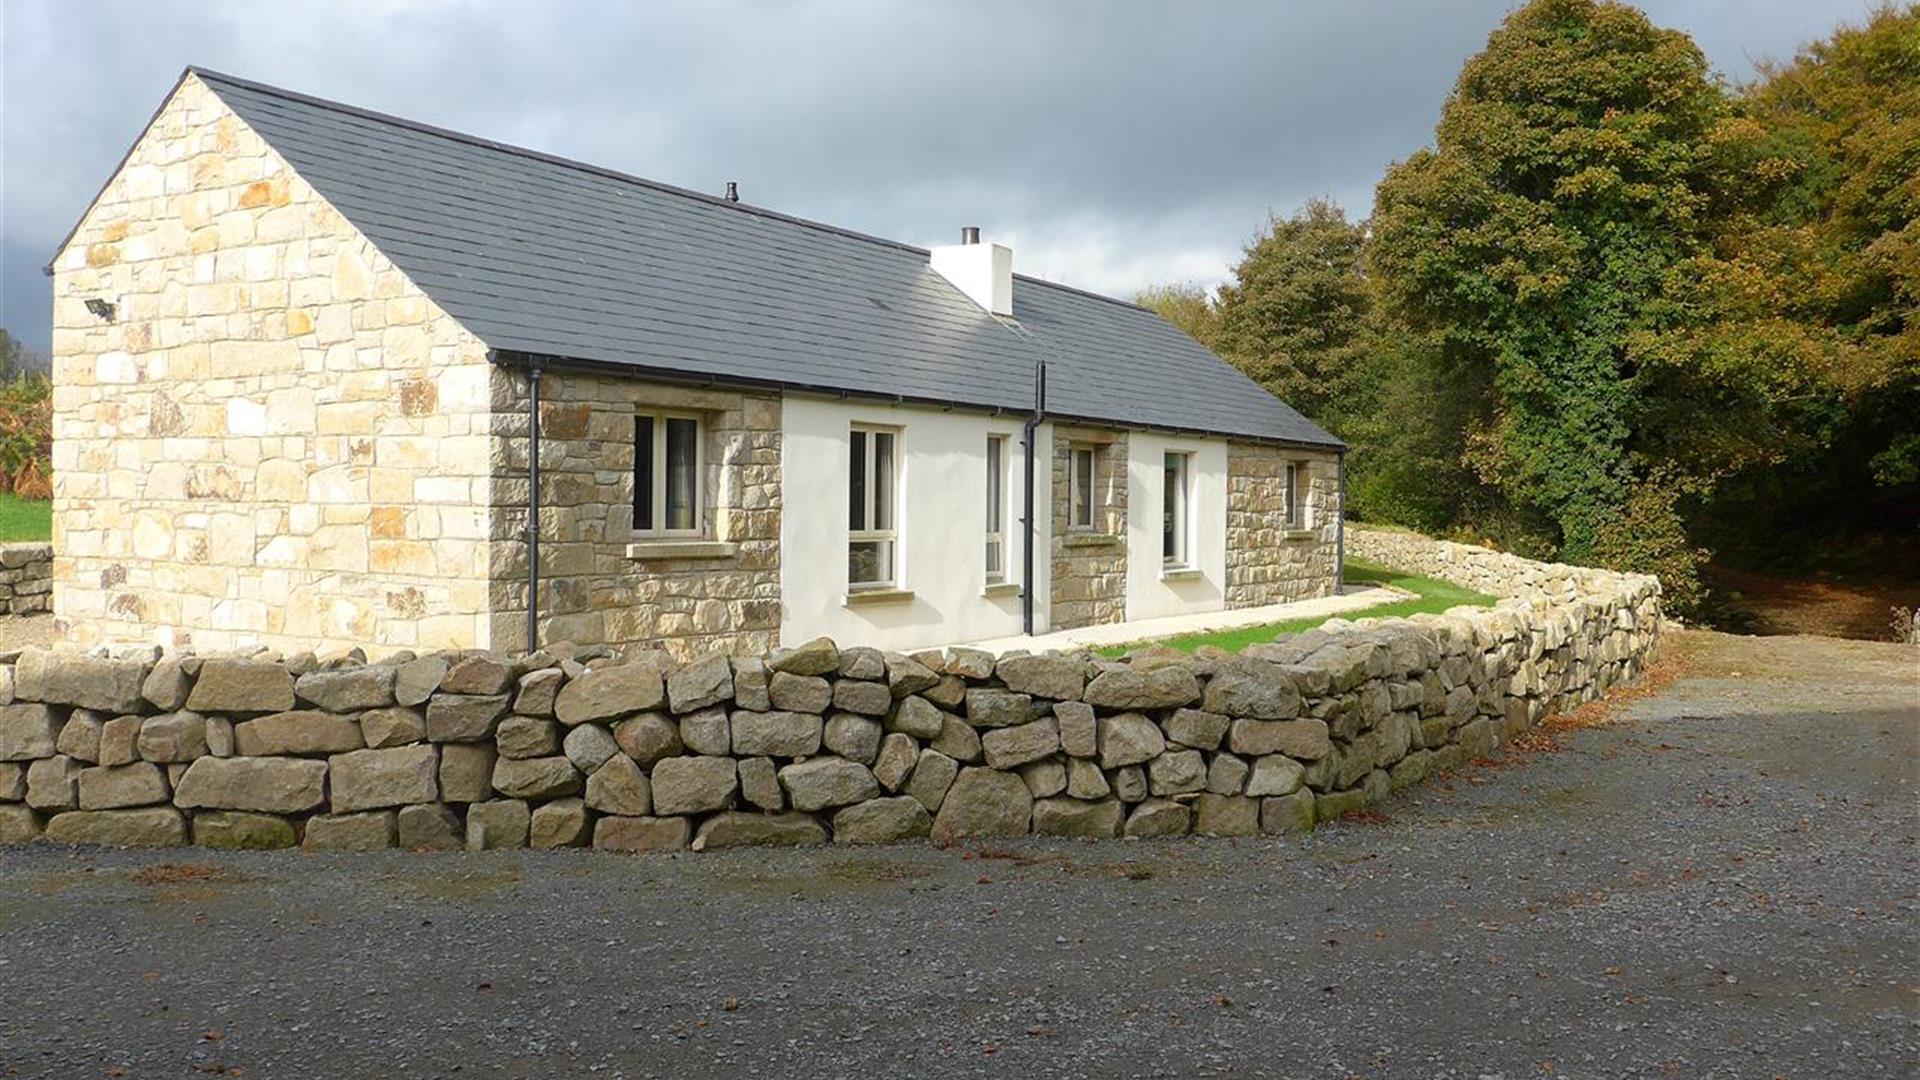 The Green Holiday Cottages - Wee Home